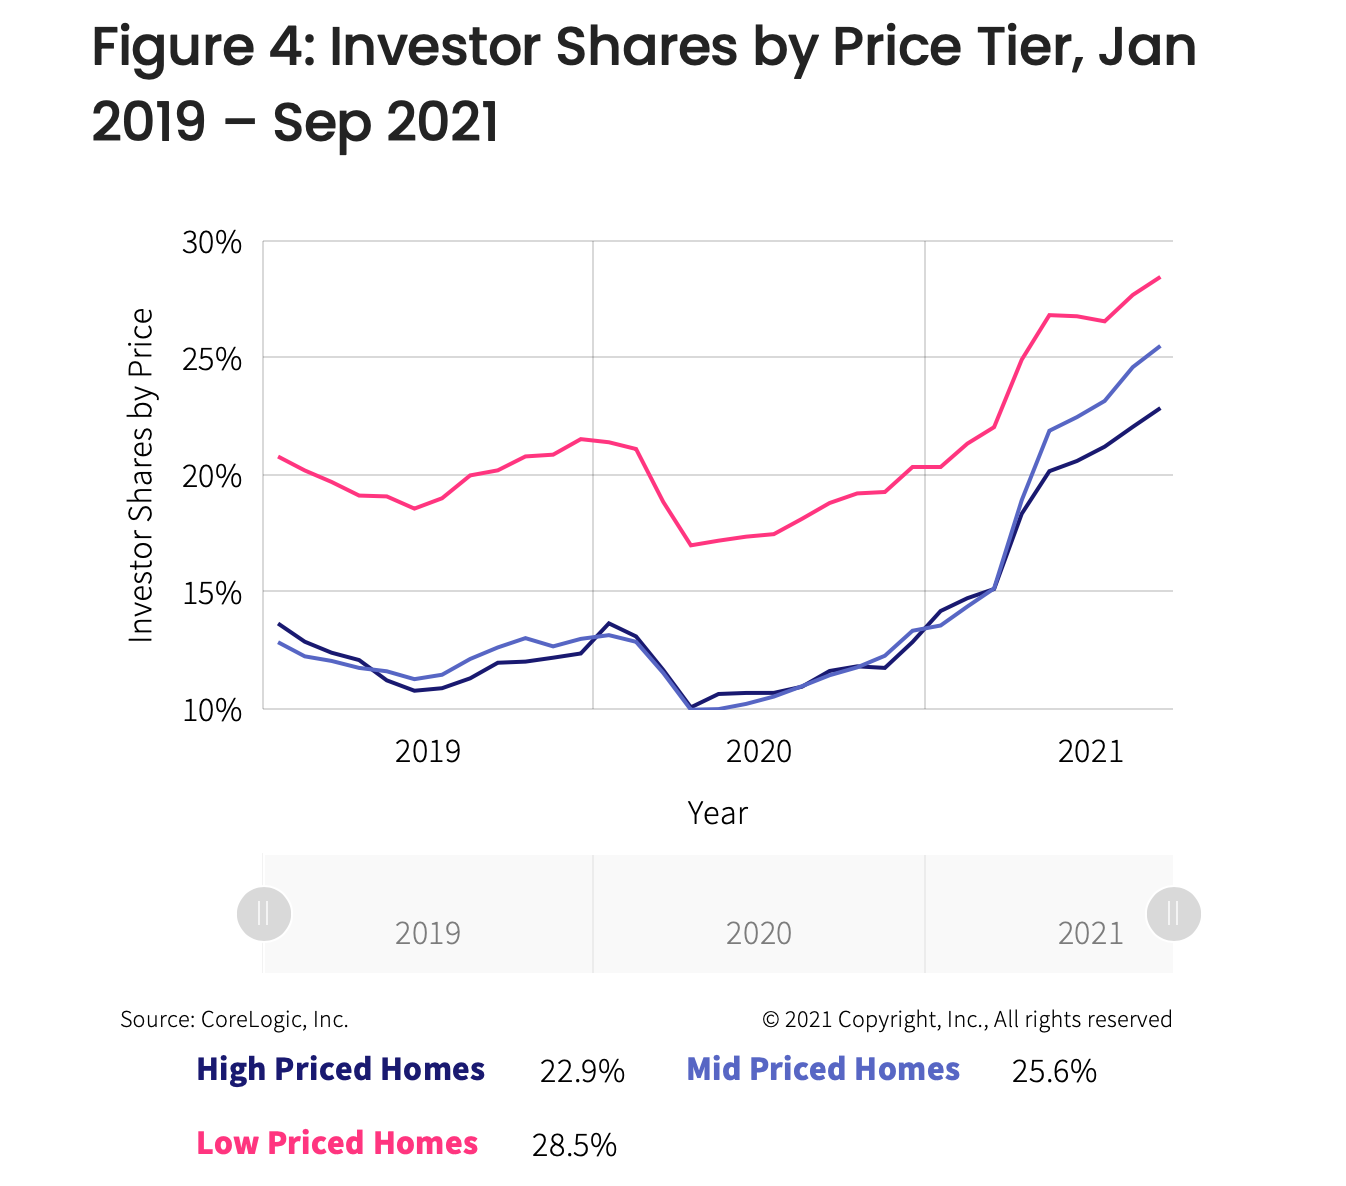 A line graph showing investor shares by price tier, from January 2019 to September 2021